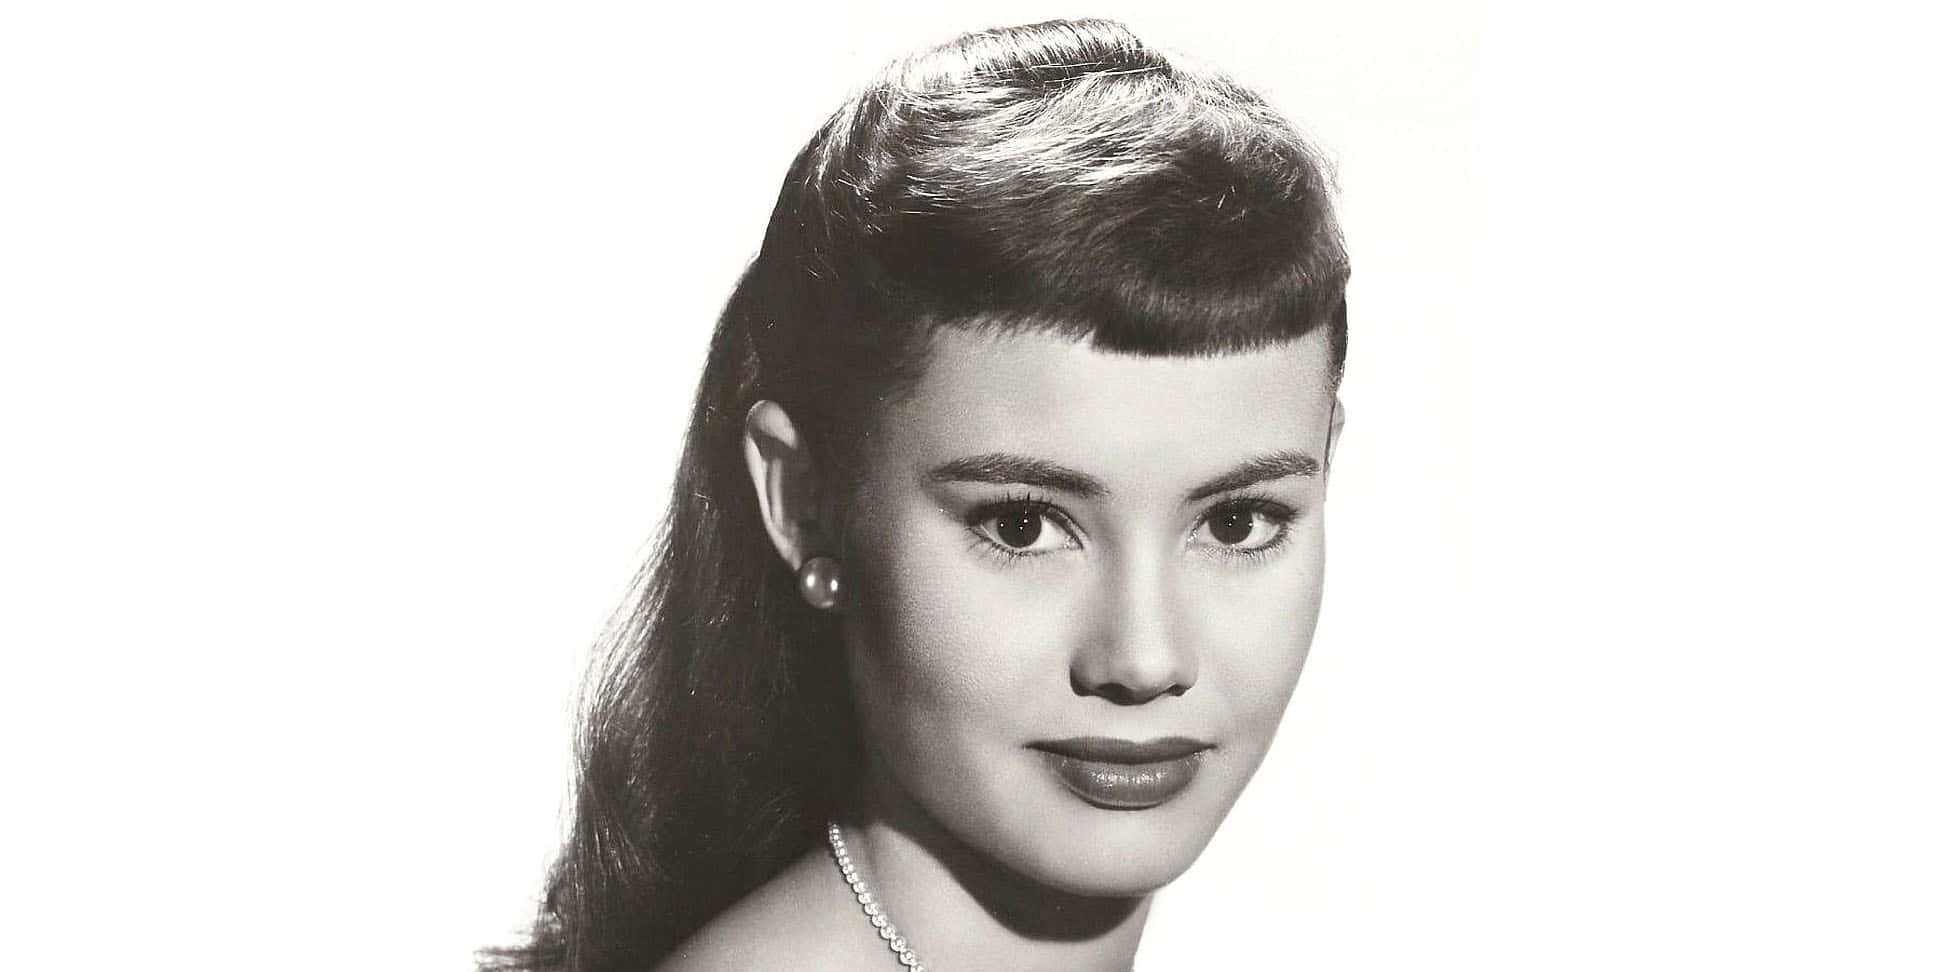 Roberta Shore is a former American actress and singer